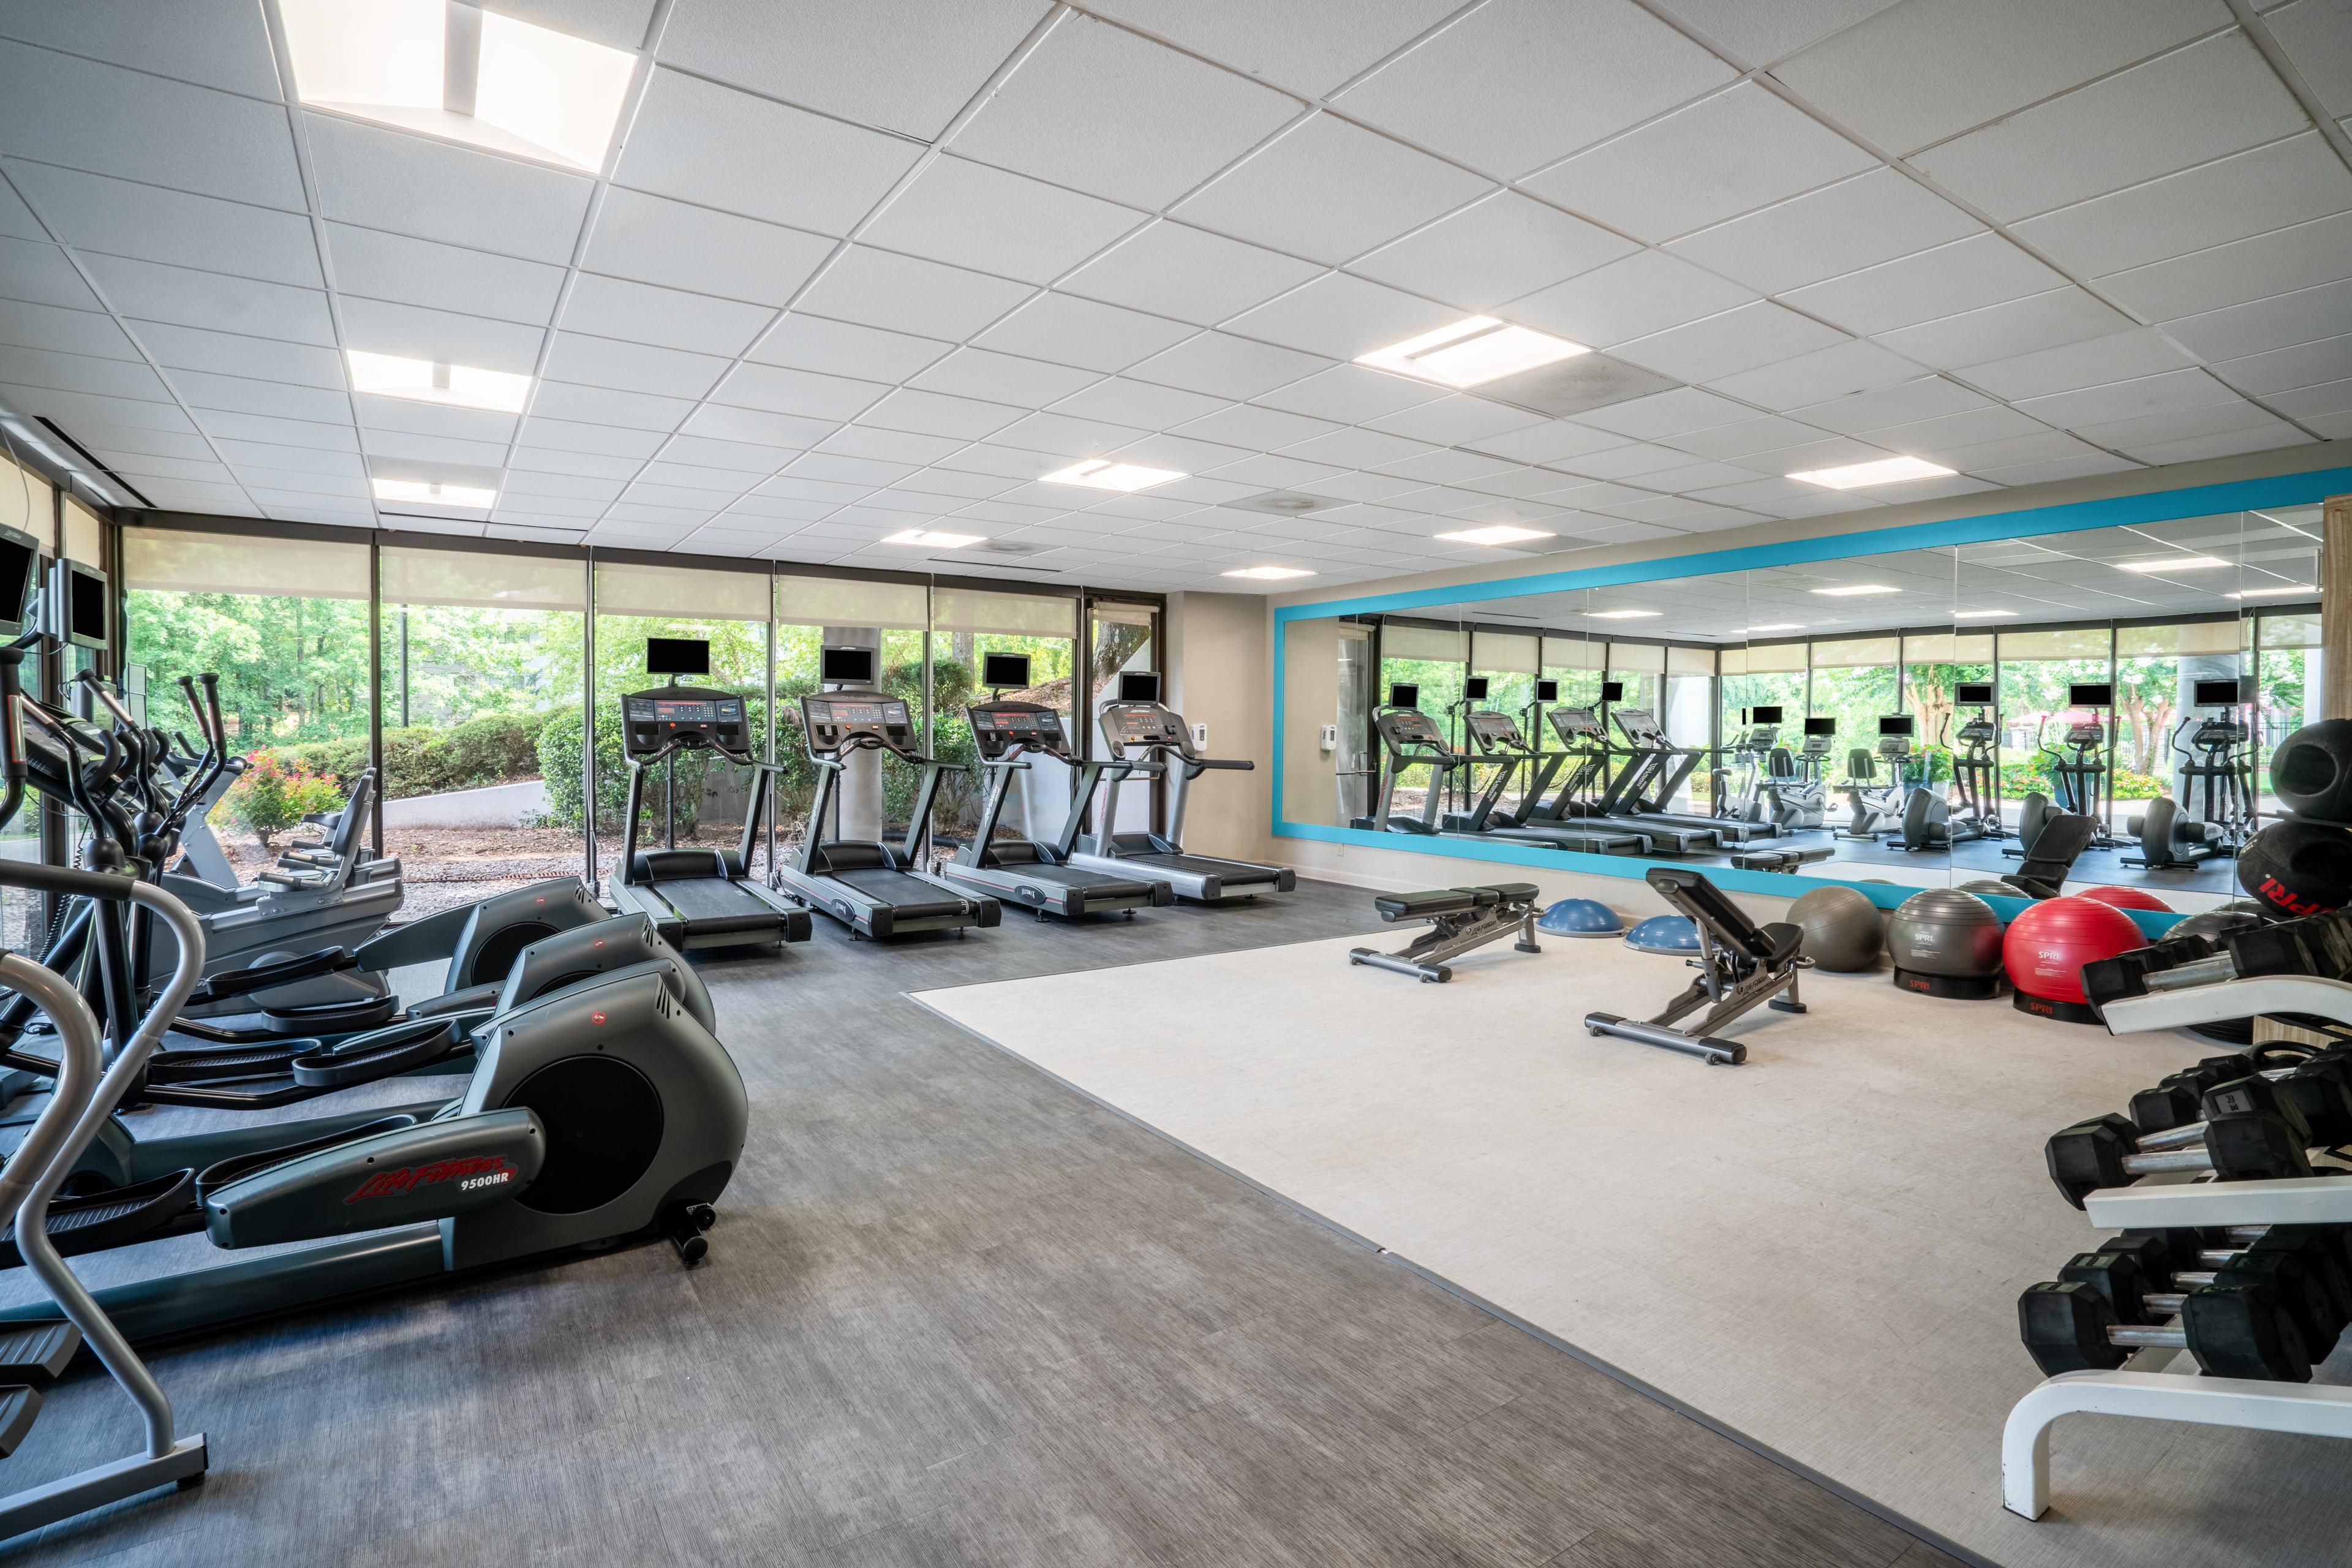 Enjoy working out in our Fitness Center, overlooking the lake.